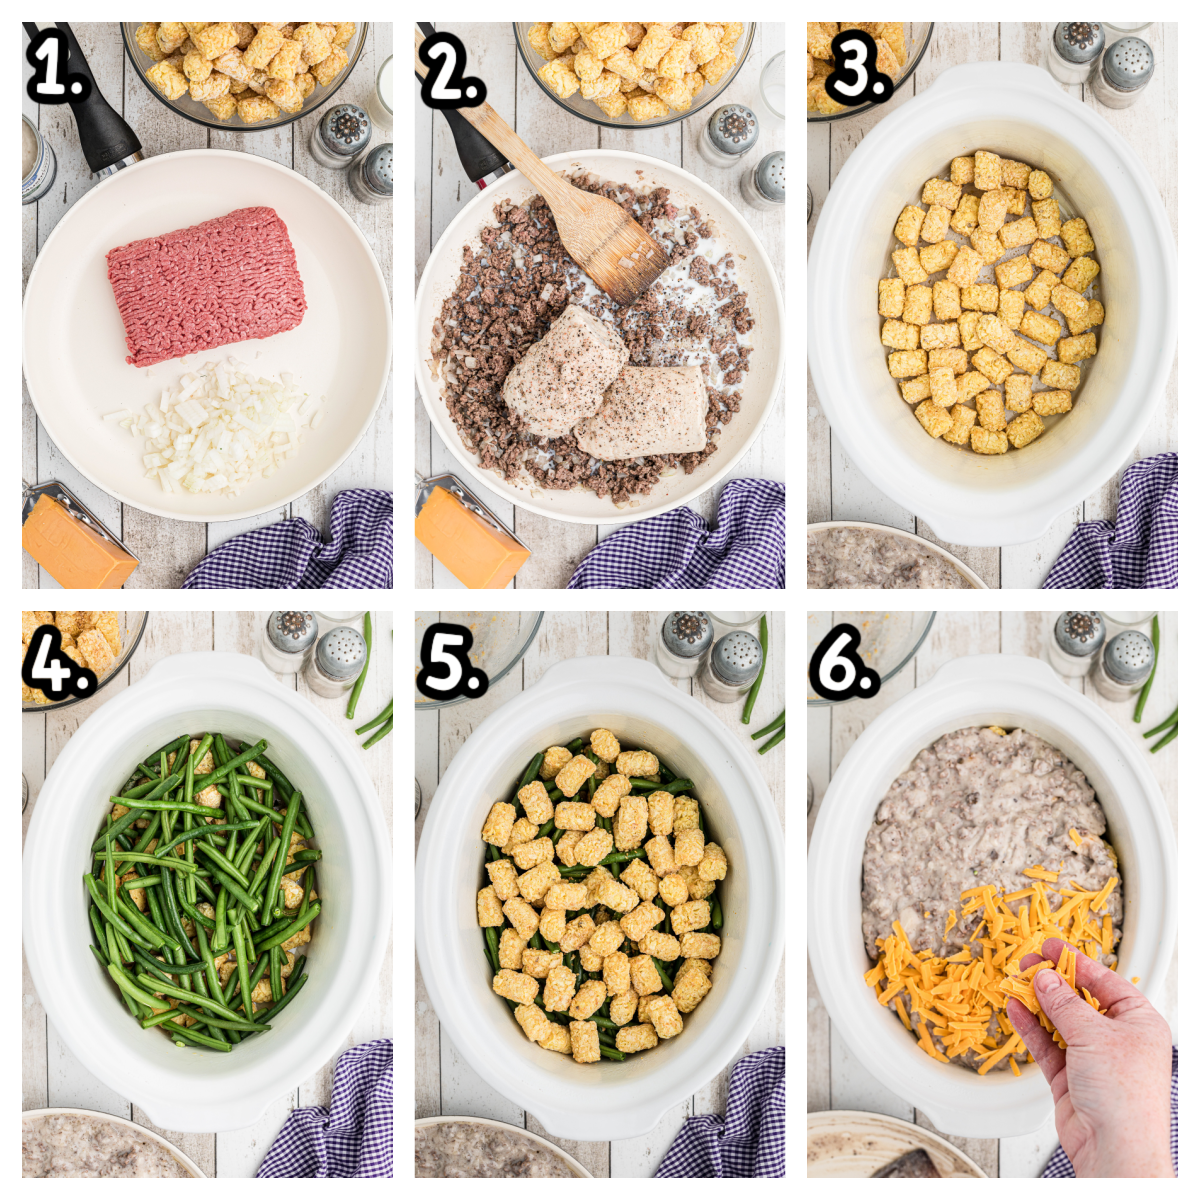 6 images showing how to assemble tater tot casserole in a crockpot.